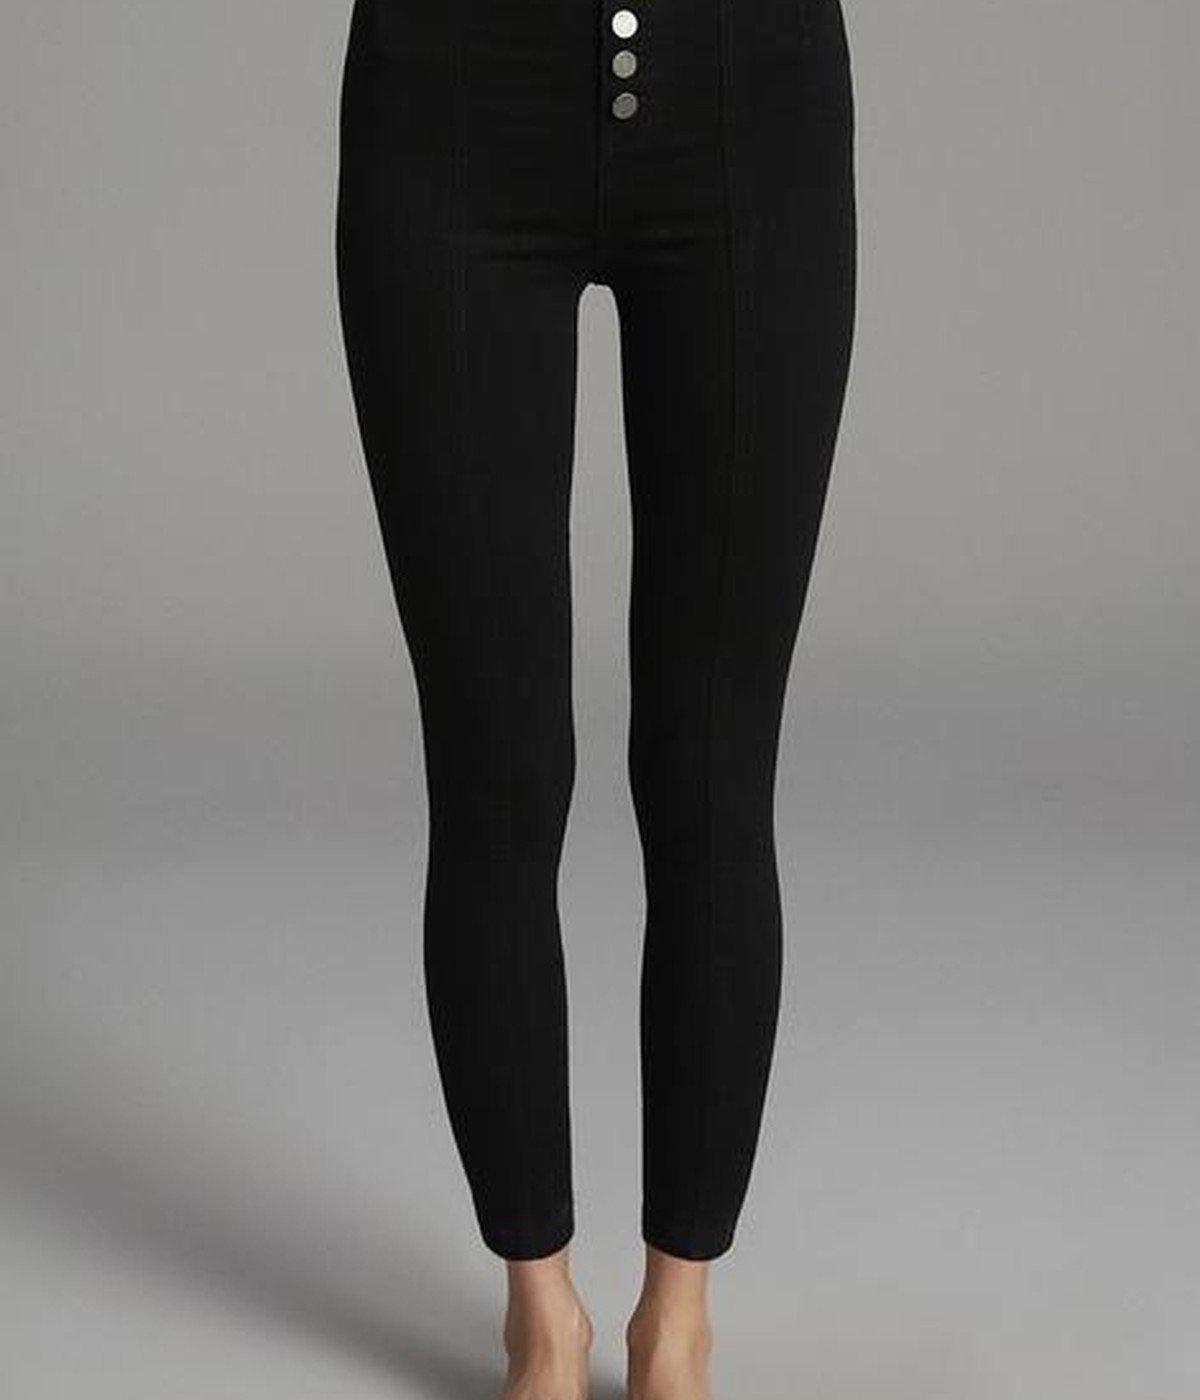 Button Detailed Shaper Jeggings